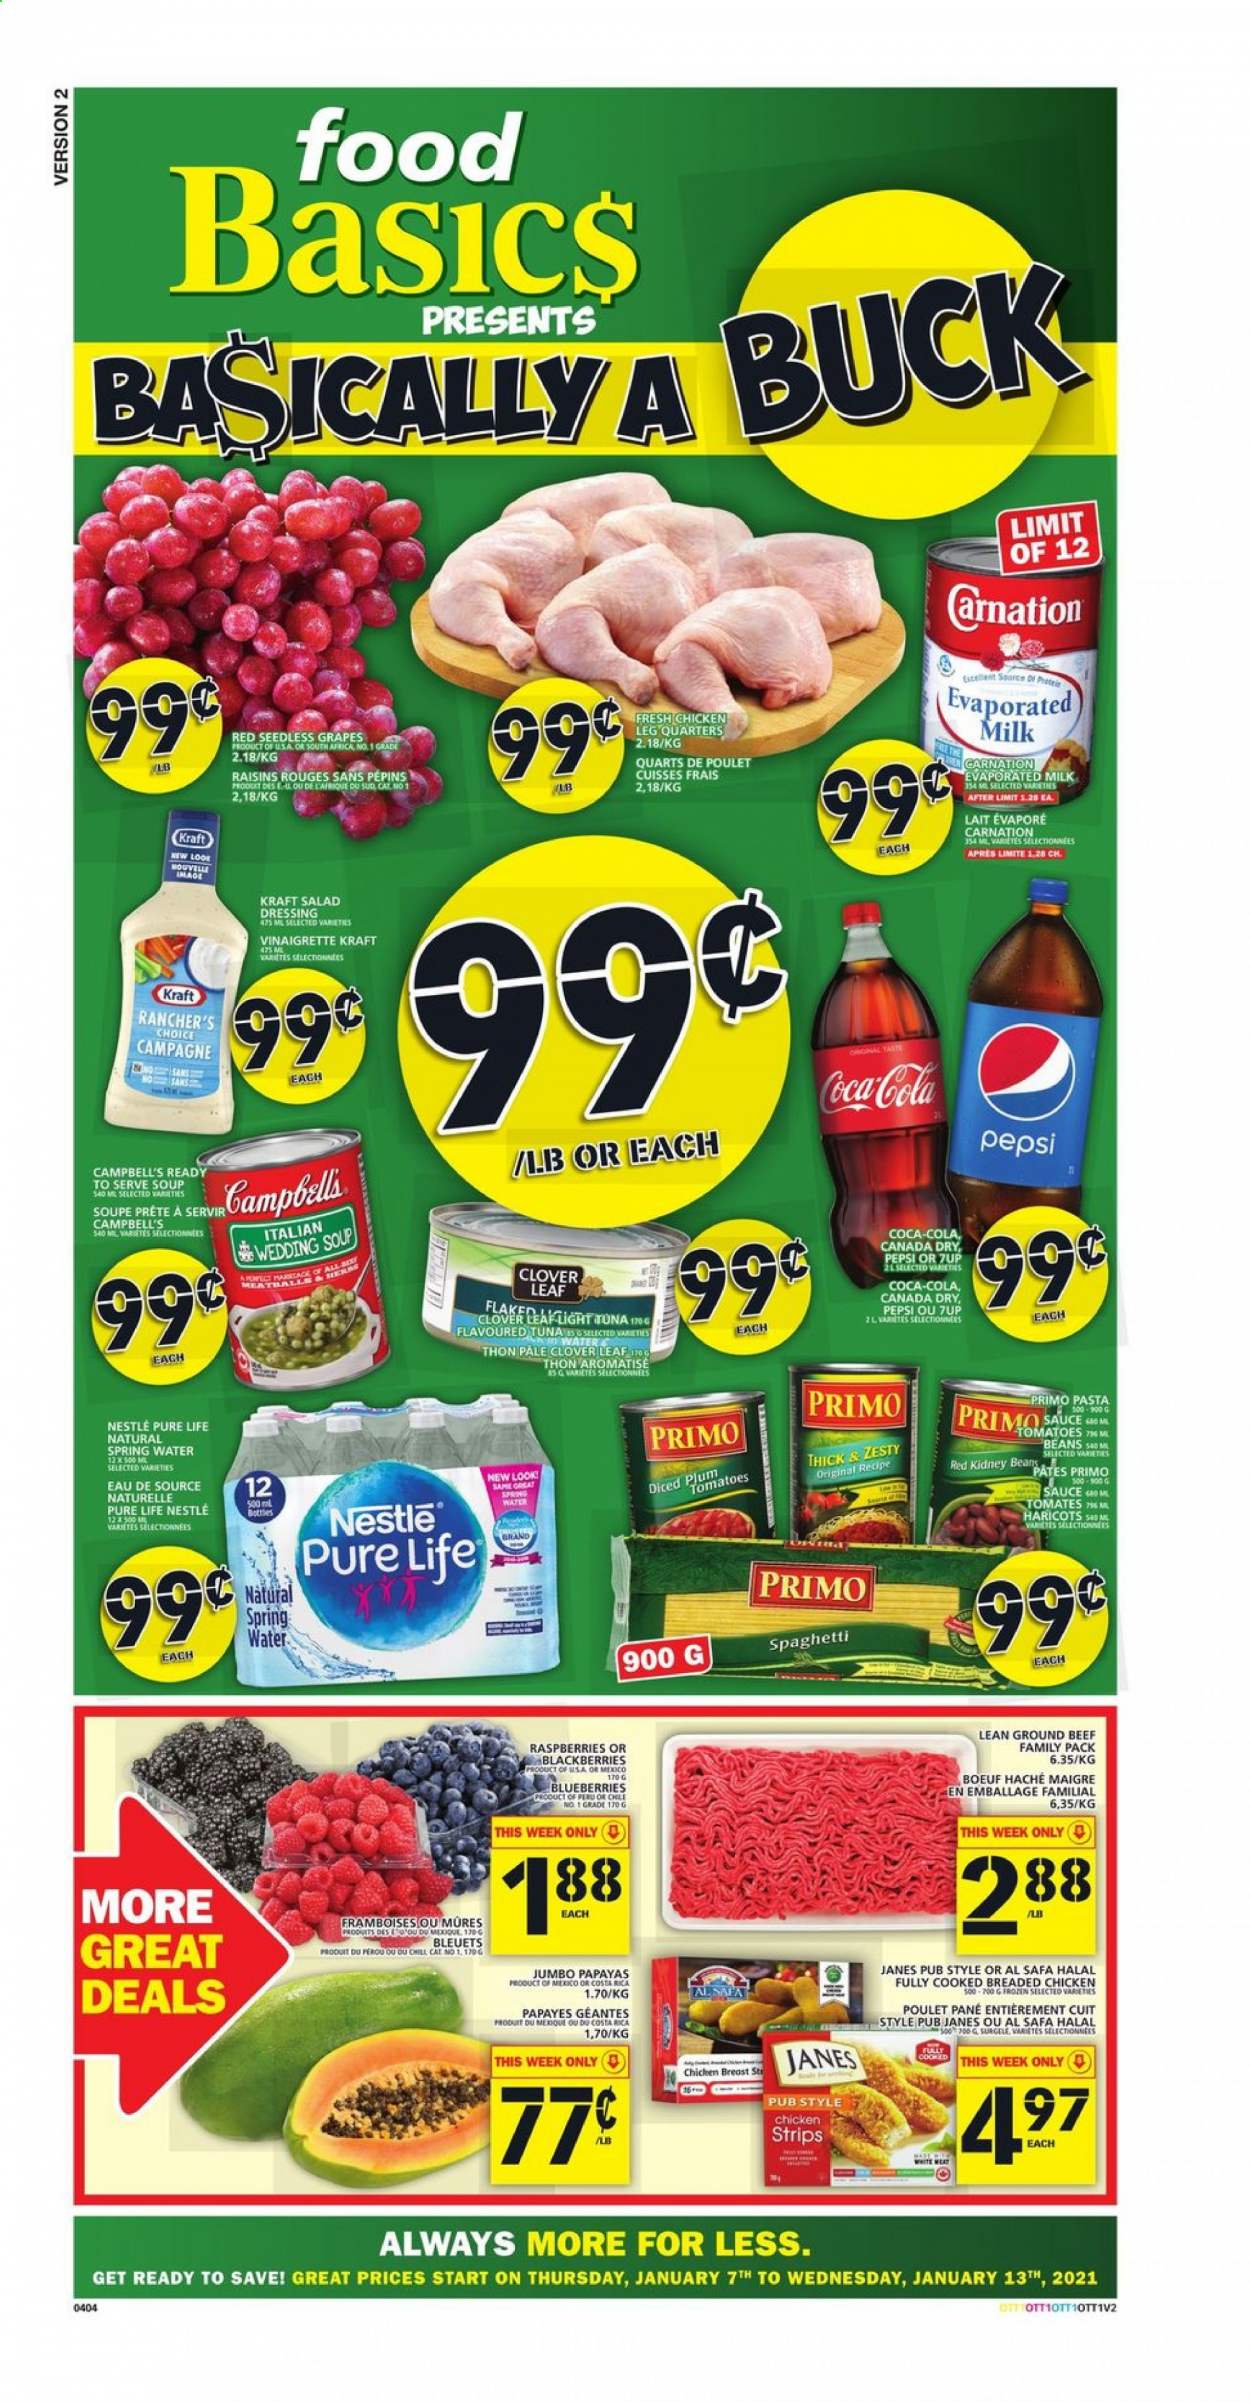 thumbnail - Food Basics Flyer - January 07, 2021 - January 13, 2021 - Sales products - beans, tomatoes, blackberries, blueberries, grapes, seedless grapes, tuna, Campbell's, spaghetti, soup, pasta, sauce, fried chicken, Kraft®, Clover, evaporated milk, strips, chicken strips, kidney beans, salad dressing, vinaigrette dressing, dressing, dried fruit, Canada Dry, Coca-Cola, Pepsi, 7UP, spring water, chicken legs, beef meat, ground beef, Nestlé, raisins. Page 1.